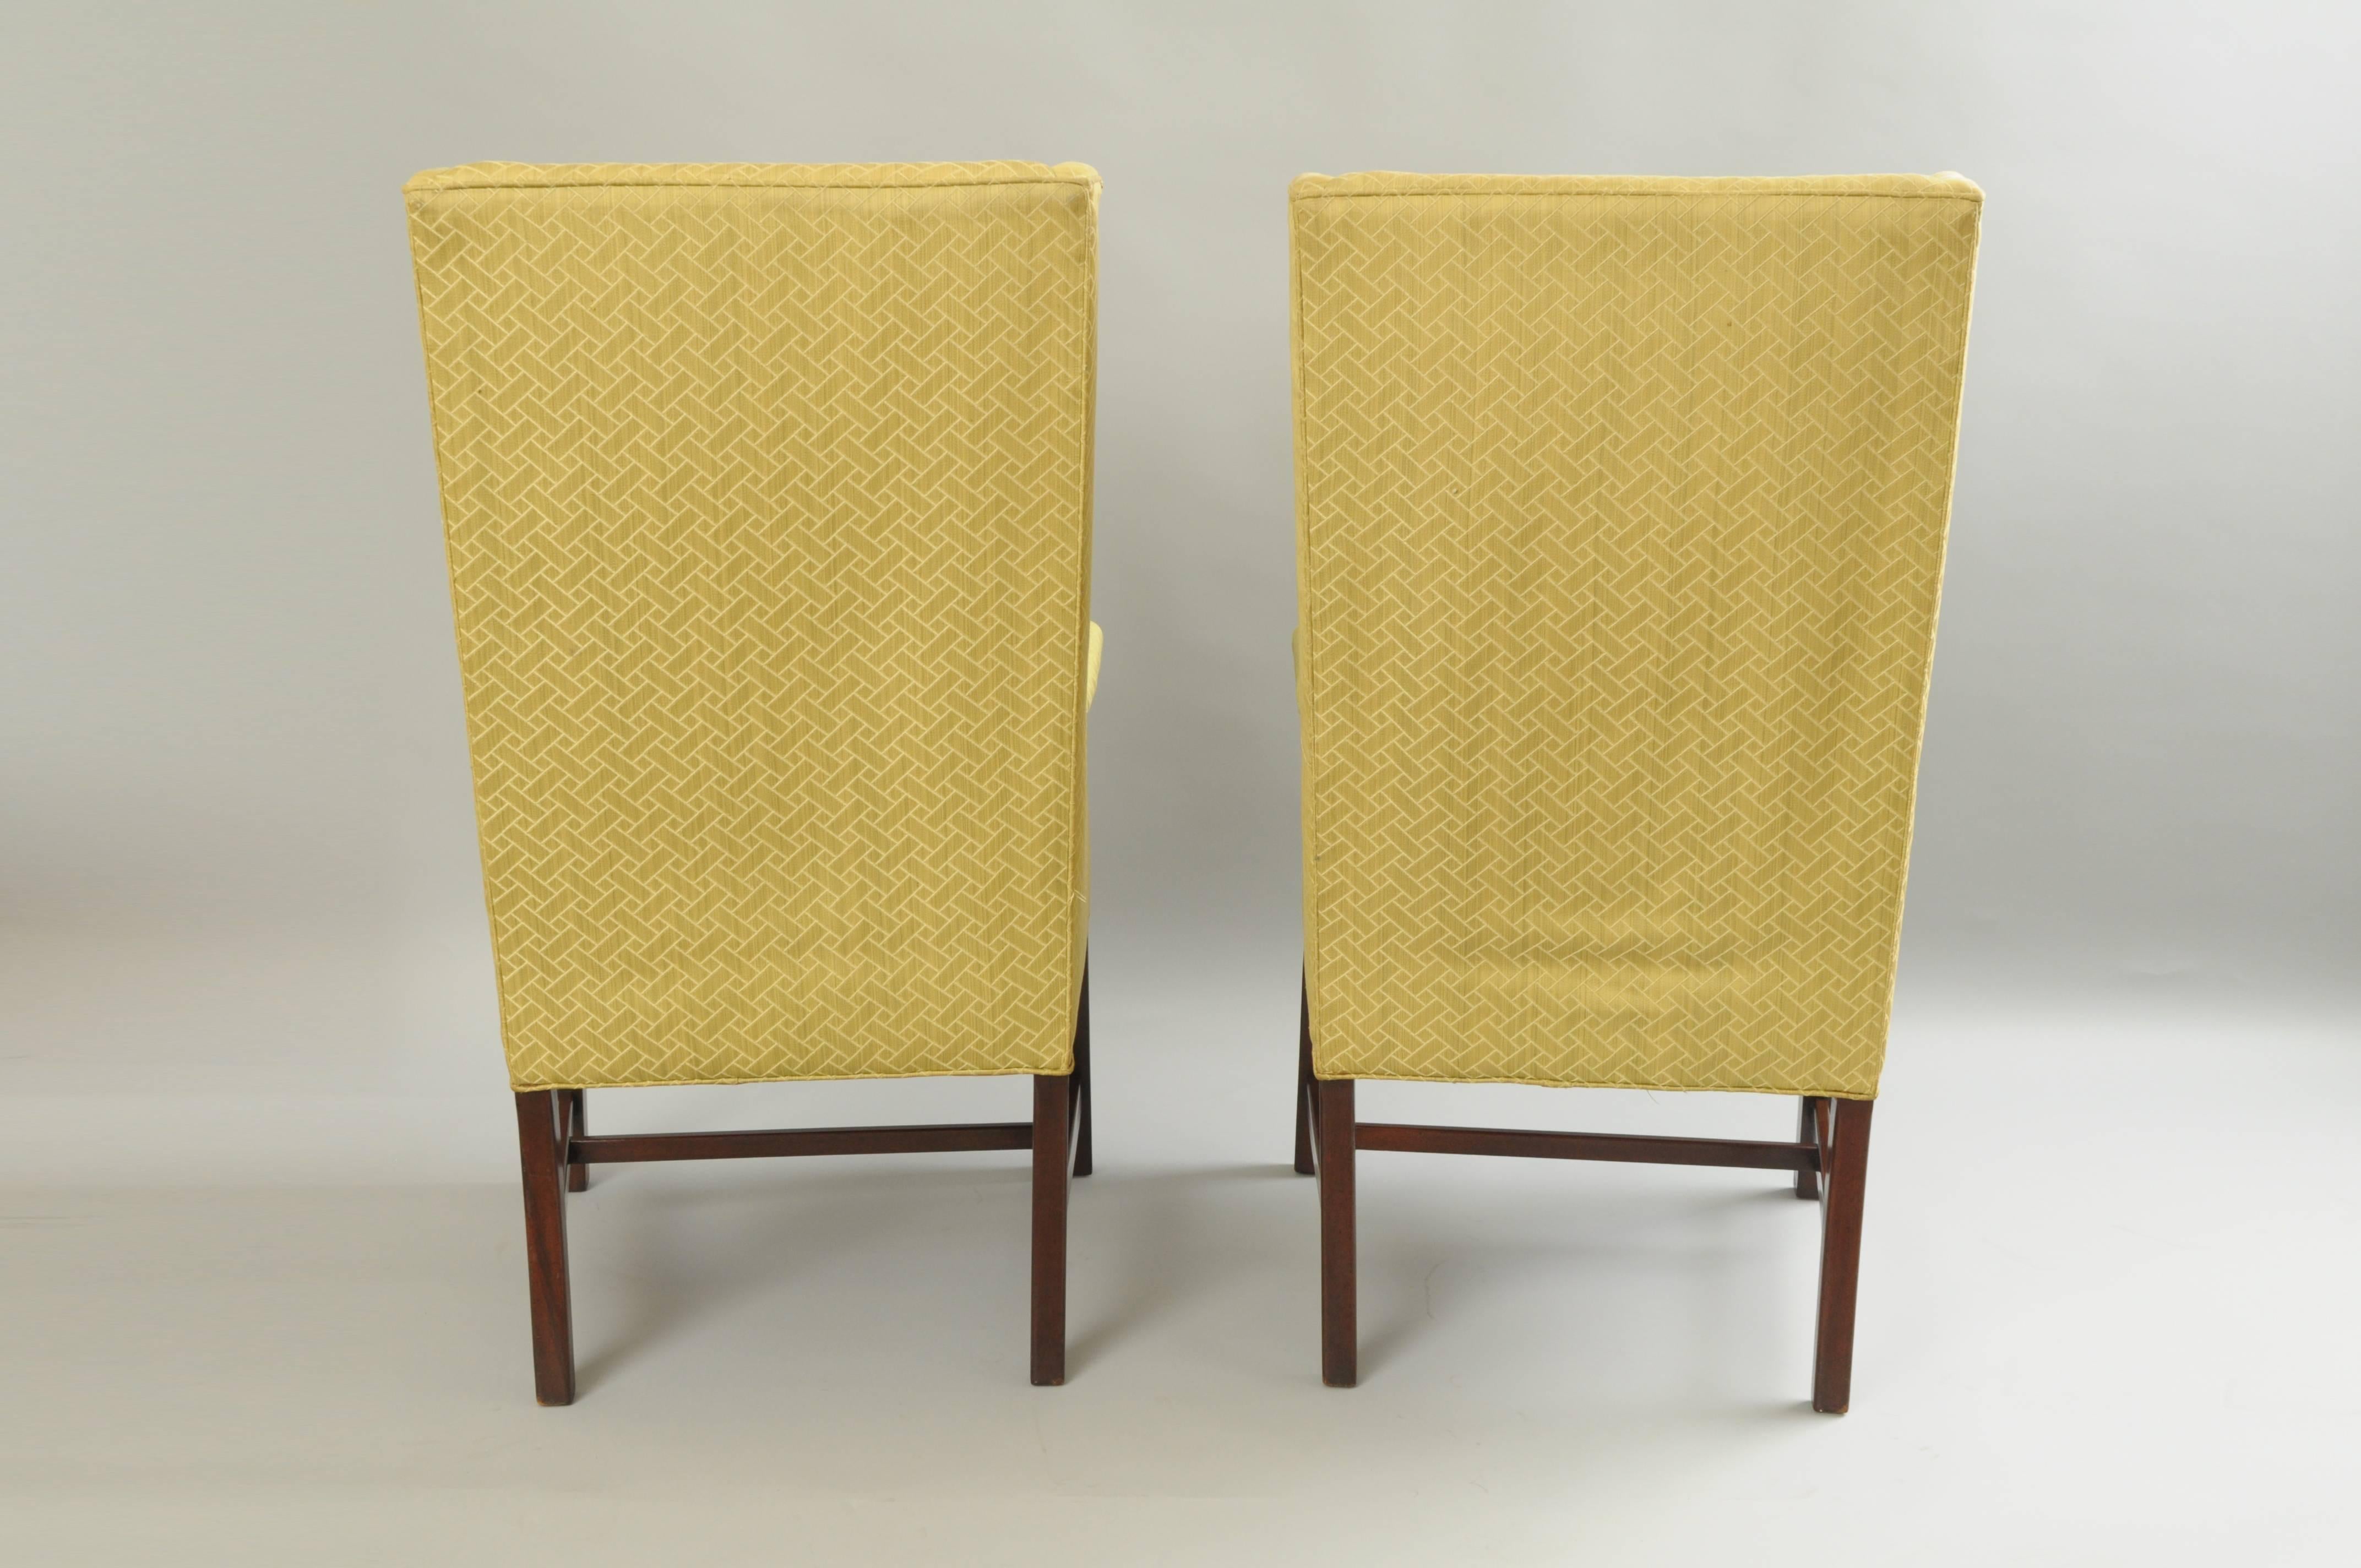 Upholstery Pair of Mid-Century Modern Mahogany Wingback Lounge Chairs after Edward Wormley